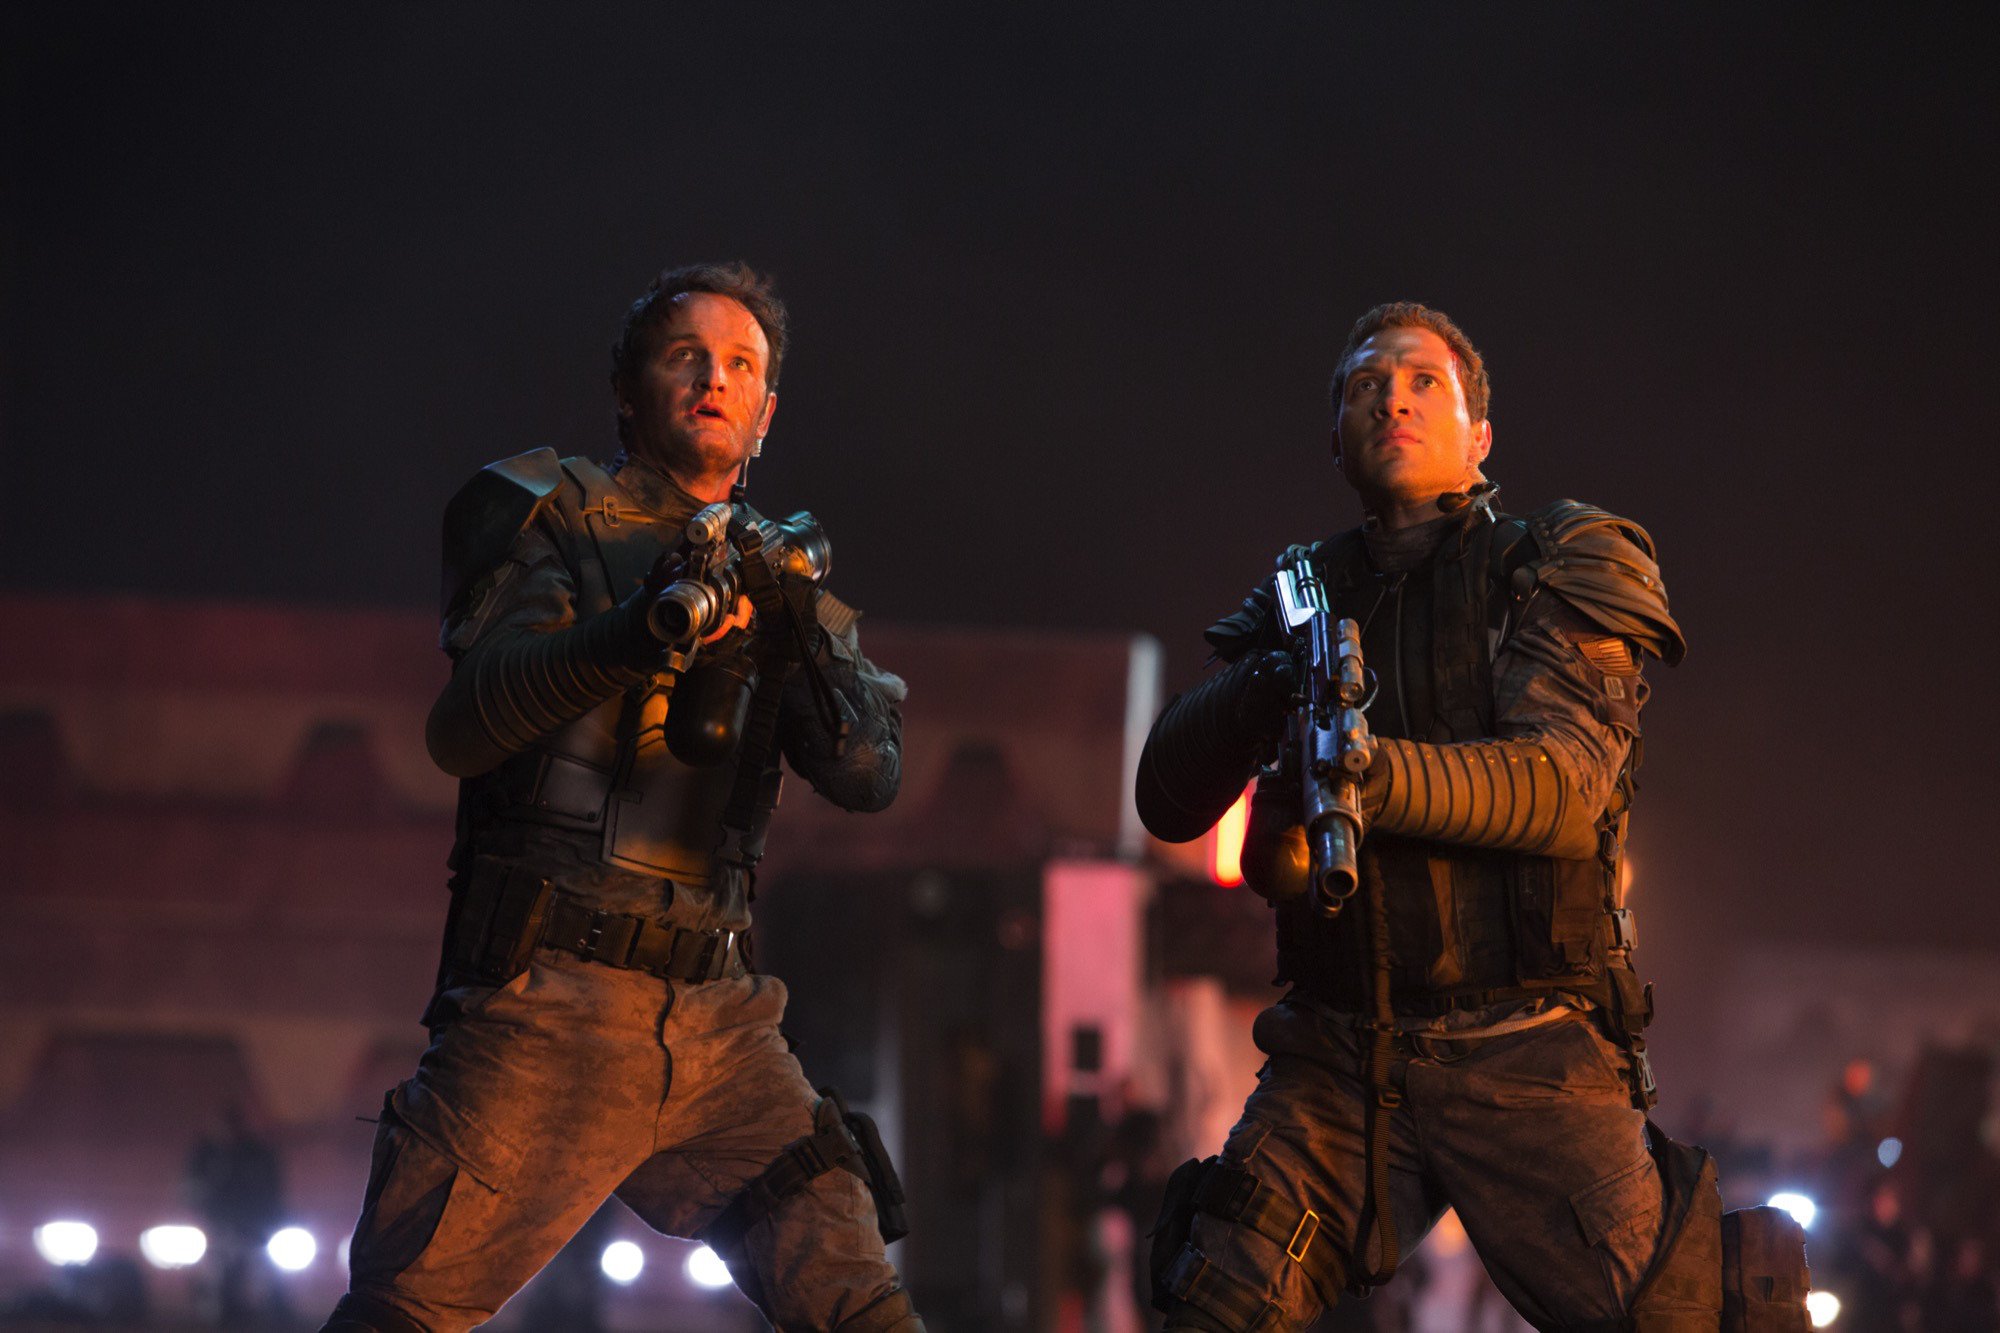 John Connor and Kyle Reese Terminator Genisys - HeadStuff.org